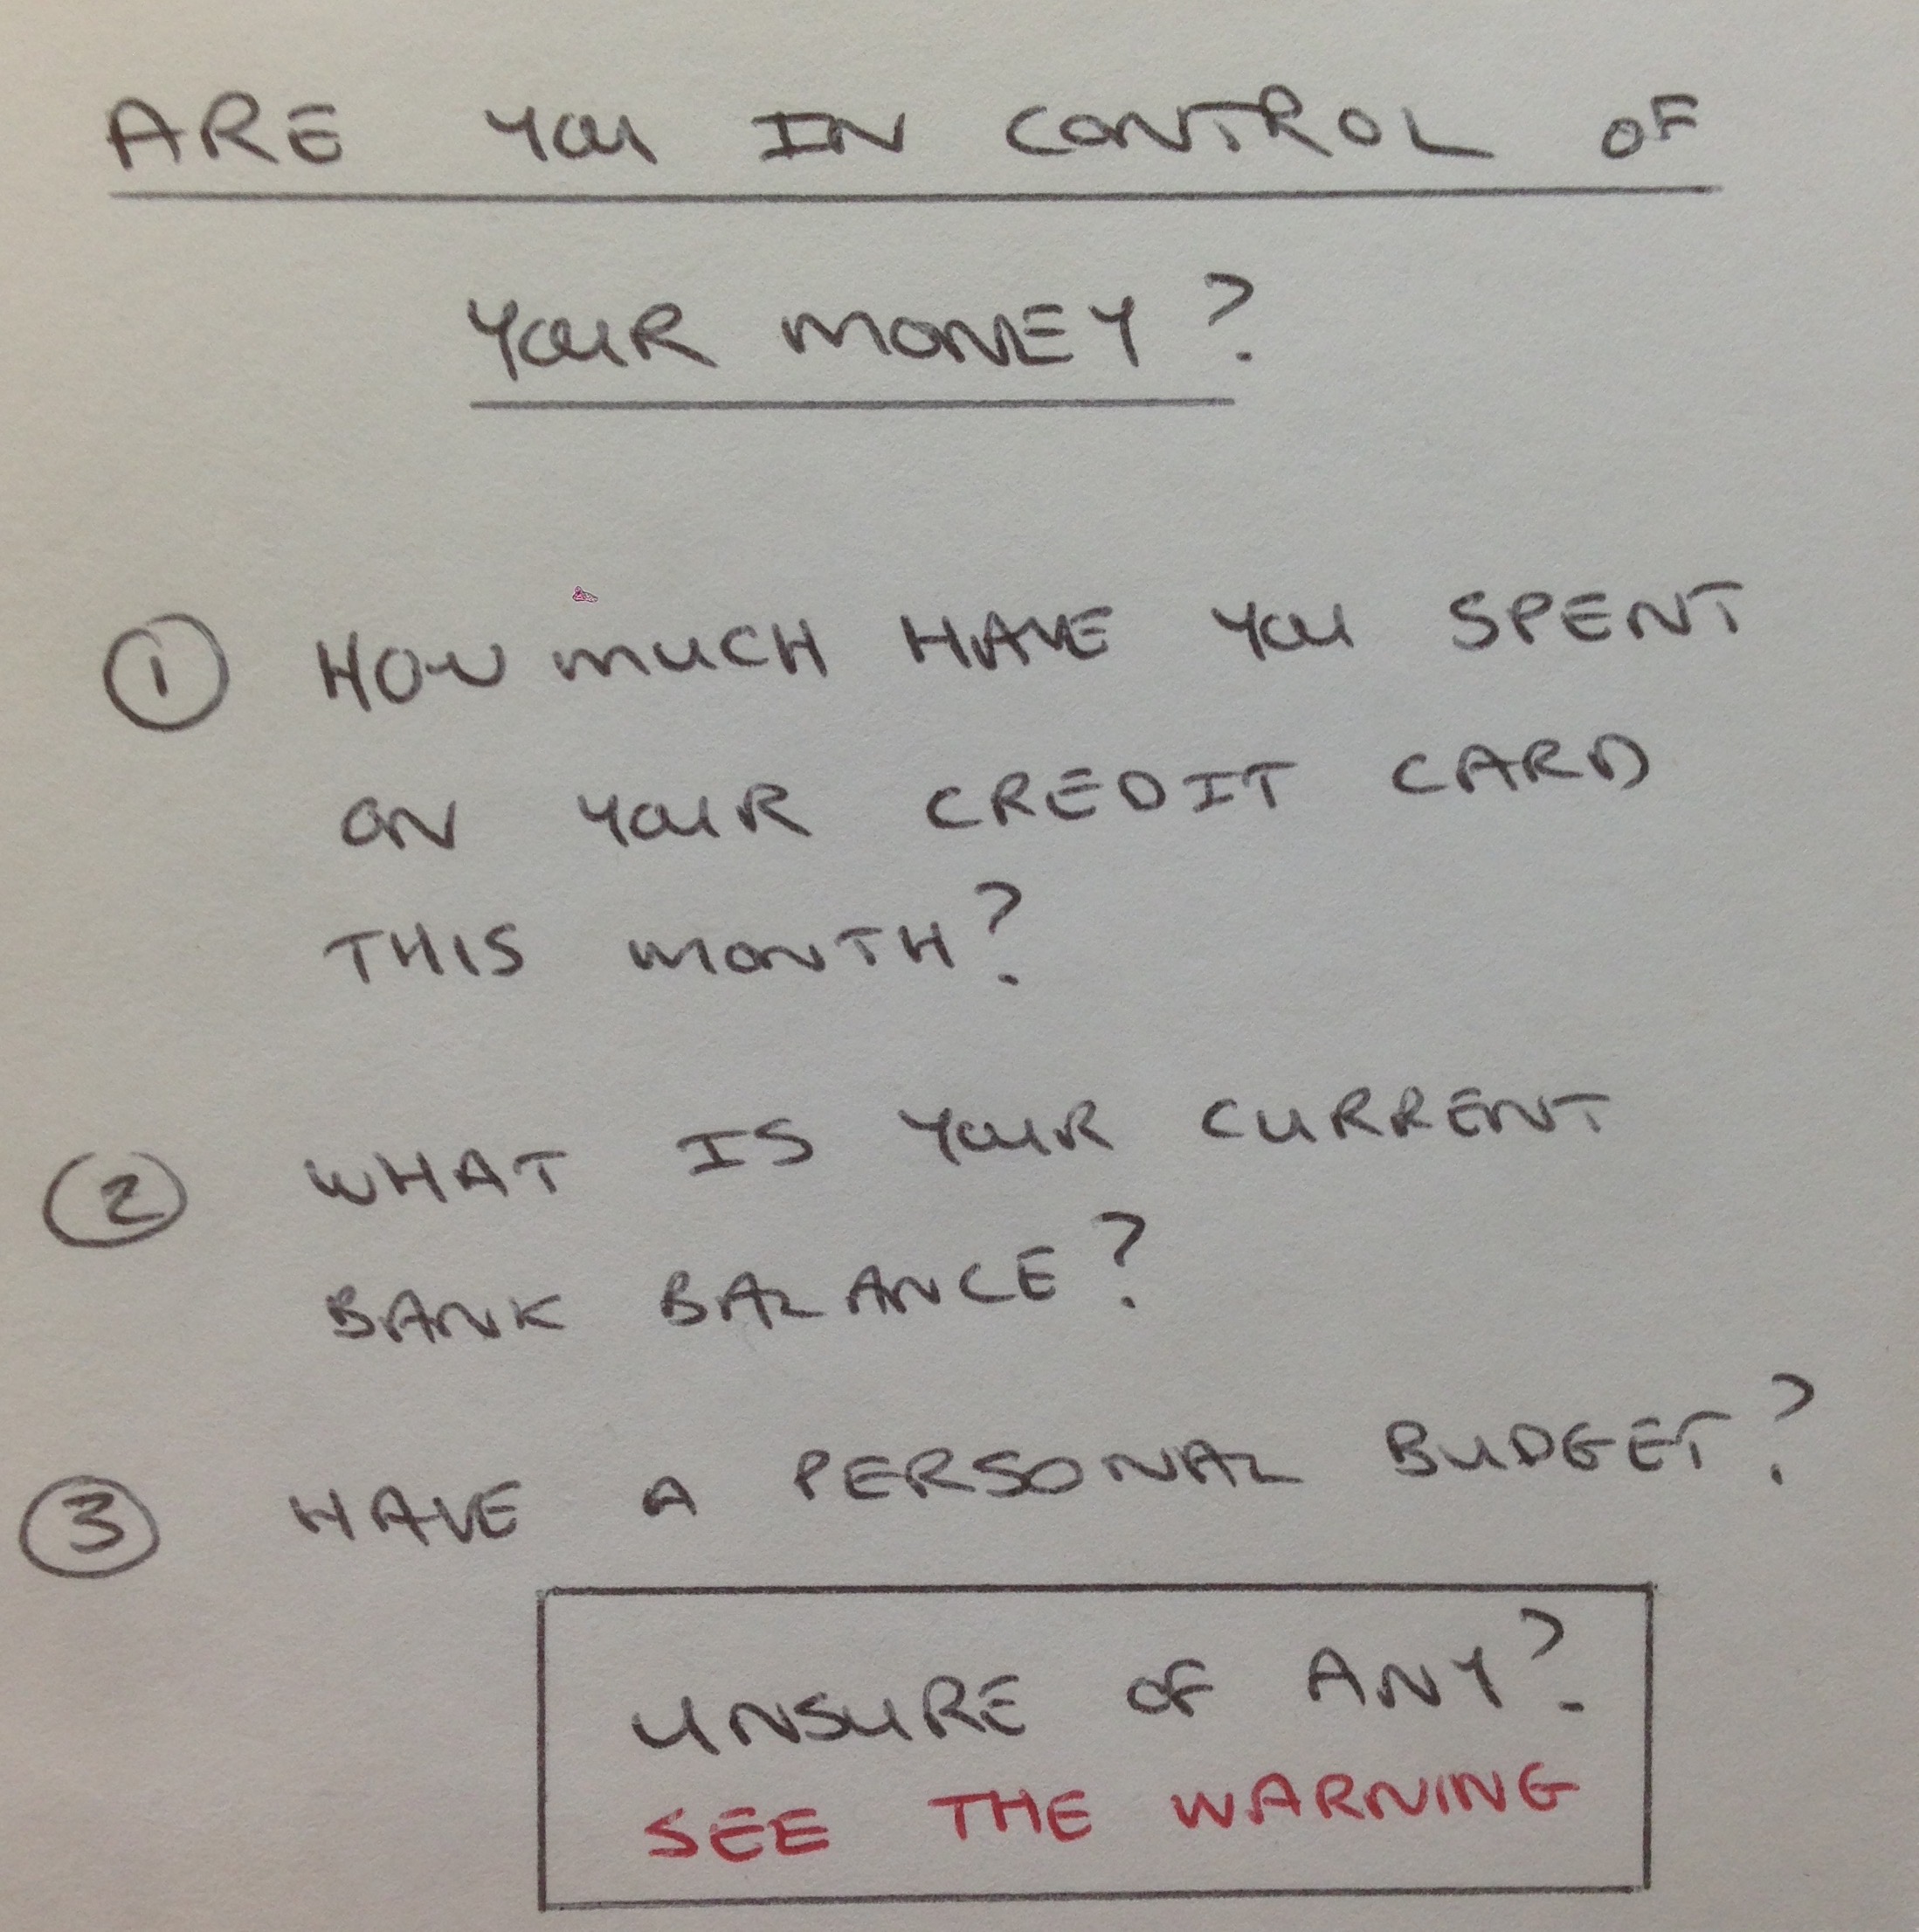 Are you in control of your money?